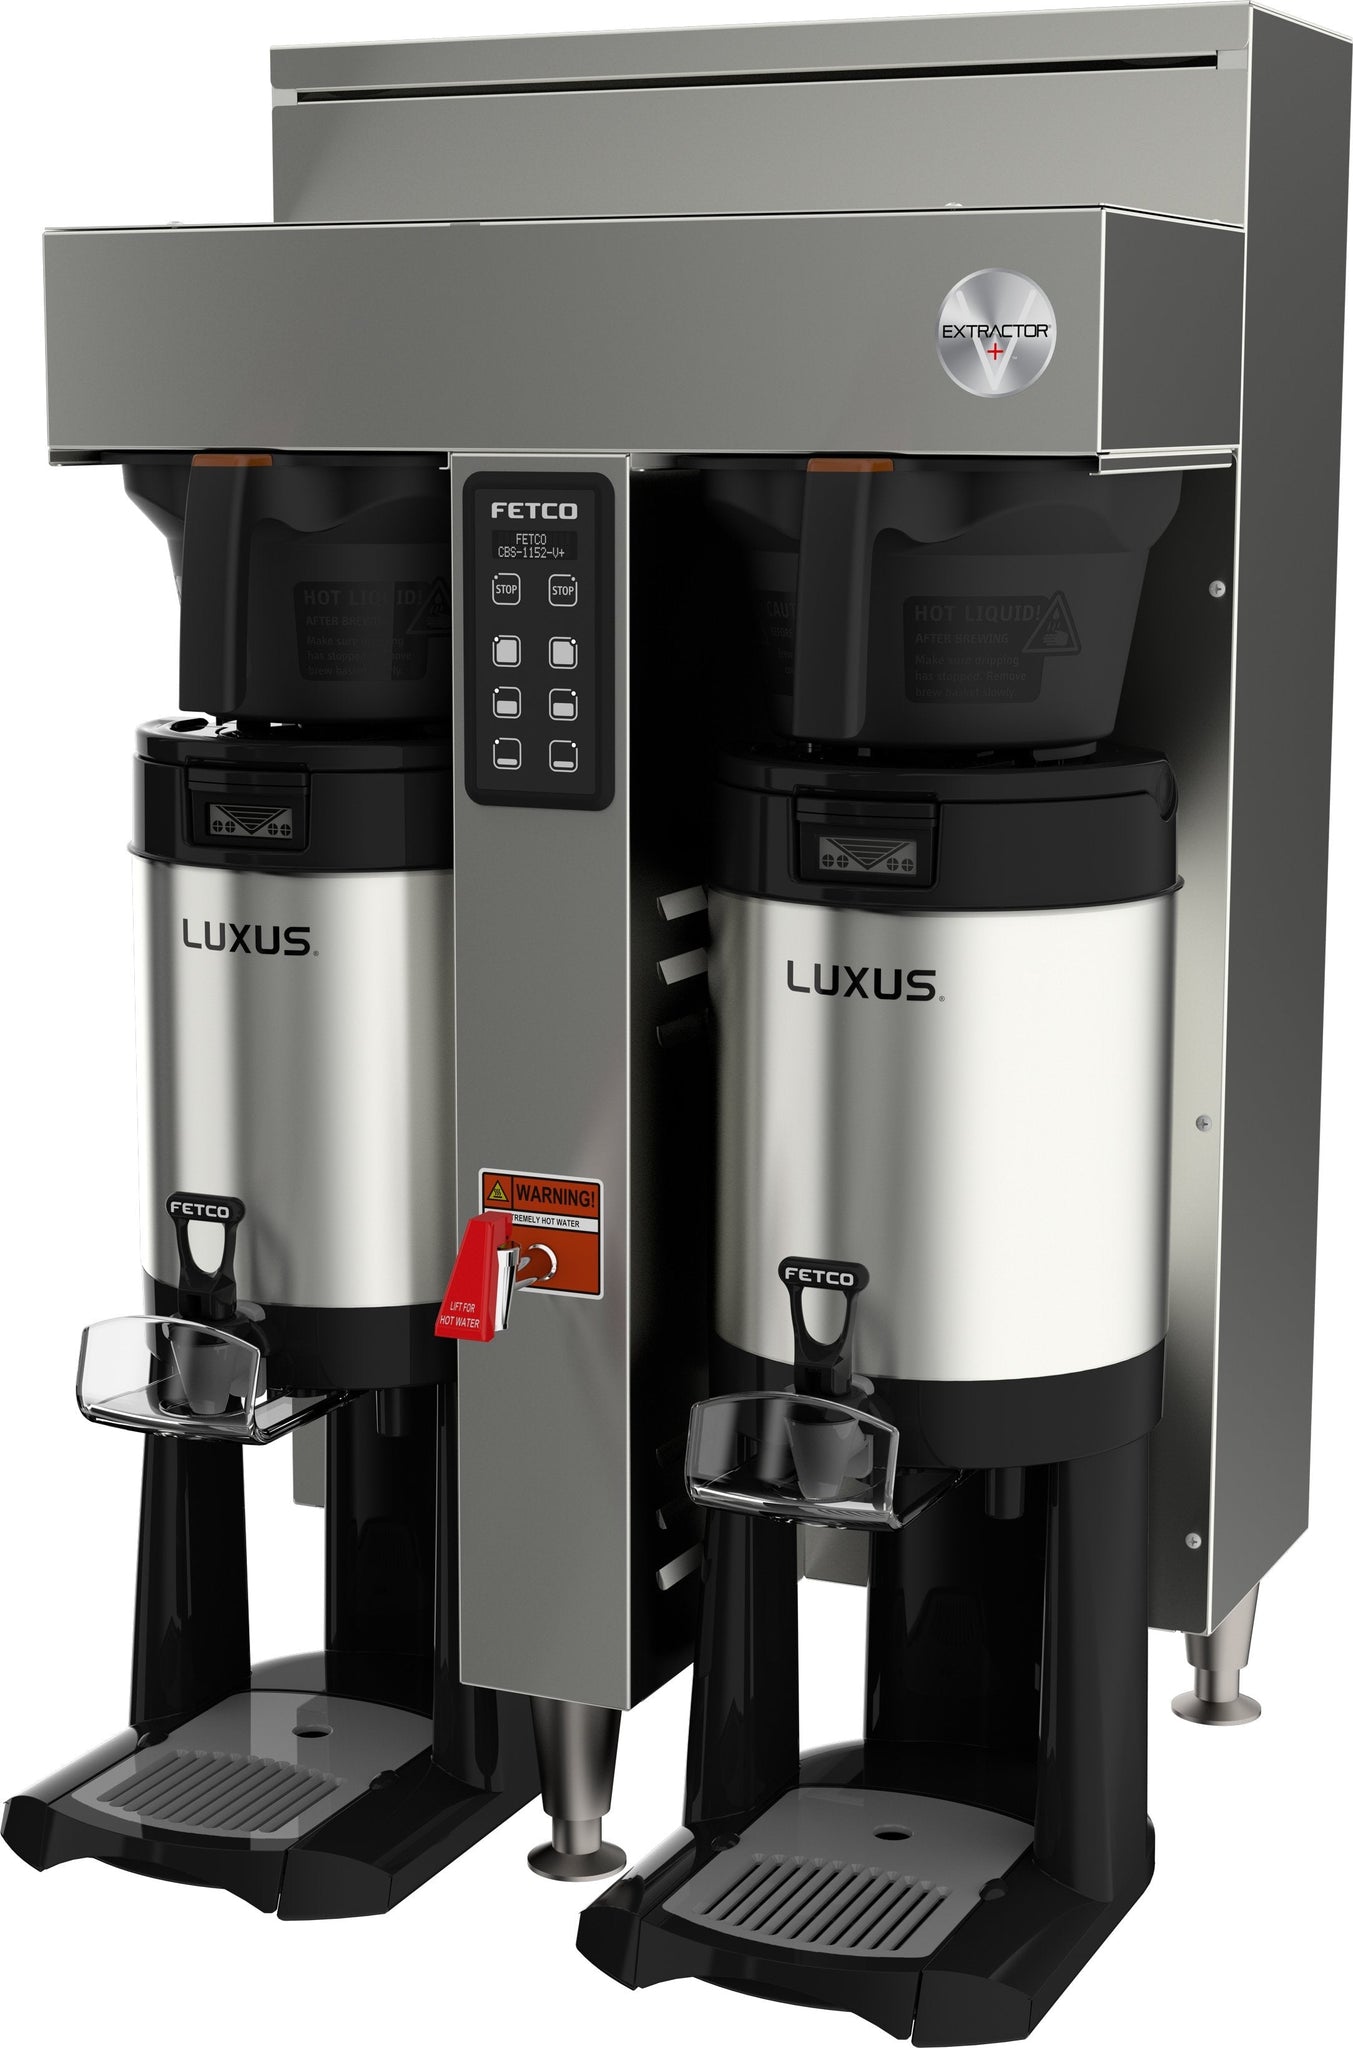 Fetco - Extractor Series Double Station Coffee Brewer 3 x 5.0 kW with Metal Brew Basket & Bypass Valve - CBS-1152V+